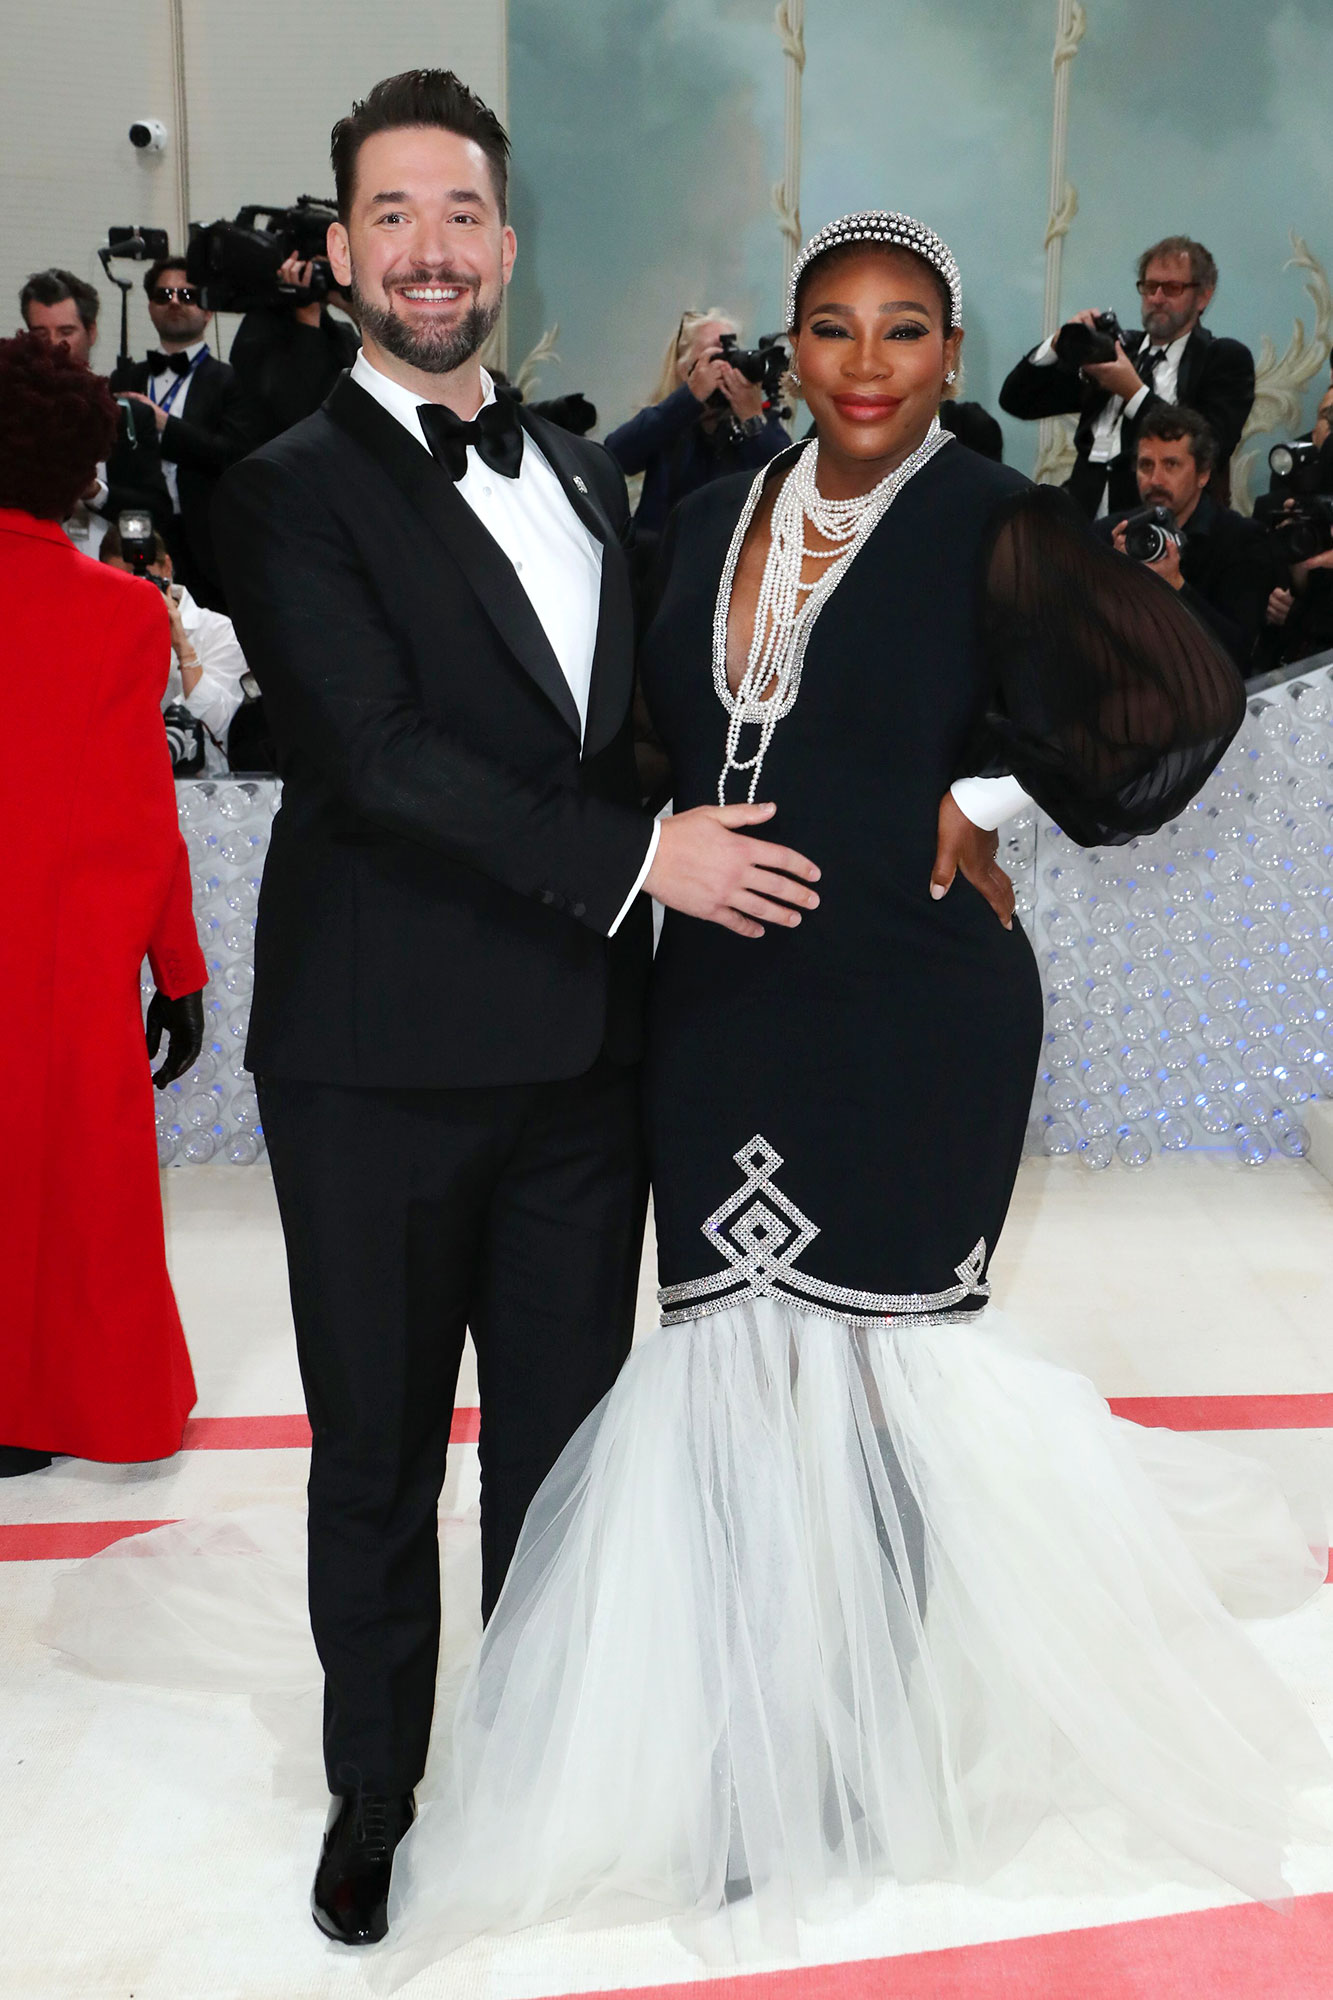 Serena Williams Pregnant, Expecting Baby No. 2 With Alexis Ohanian